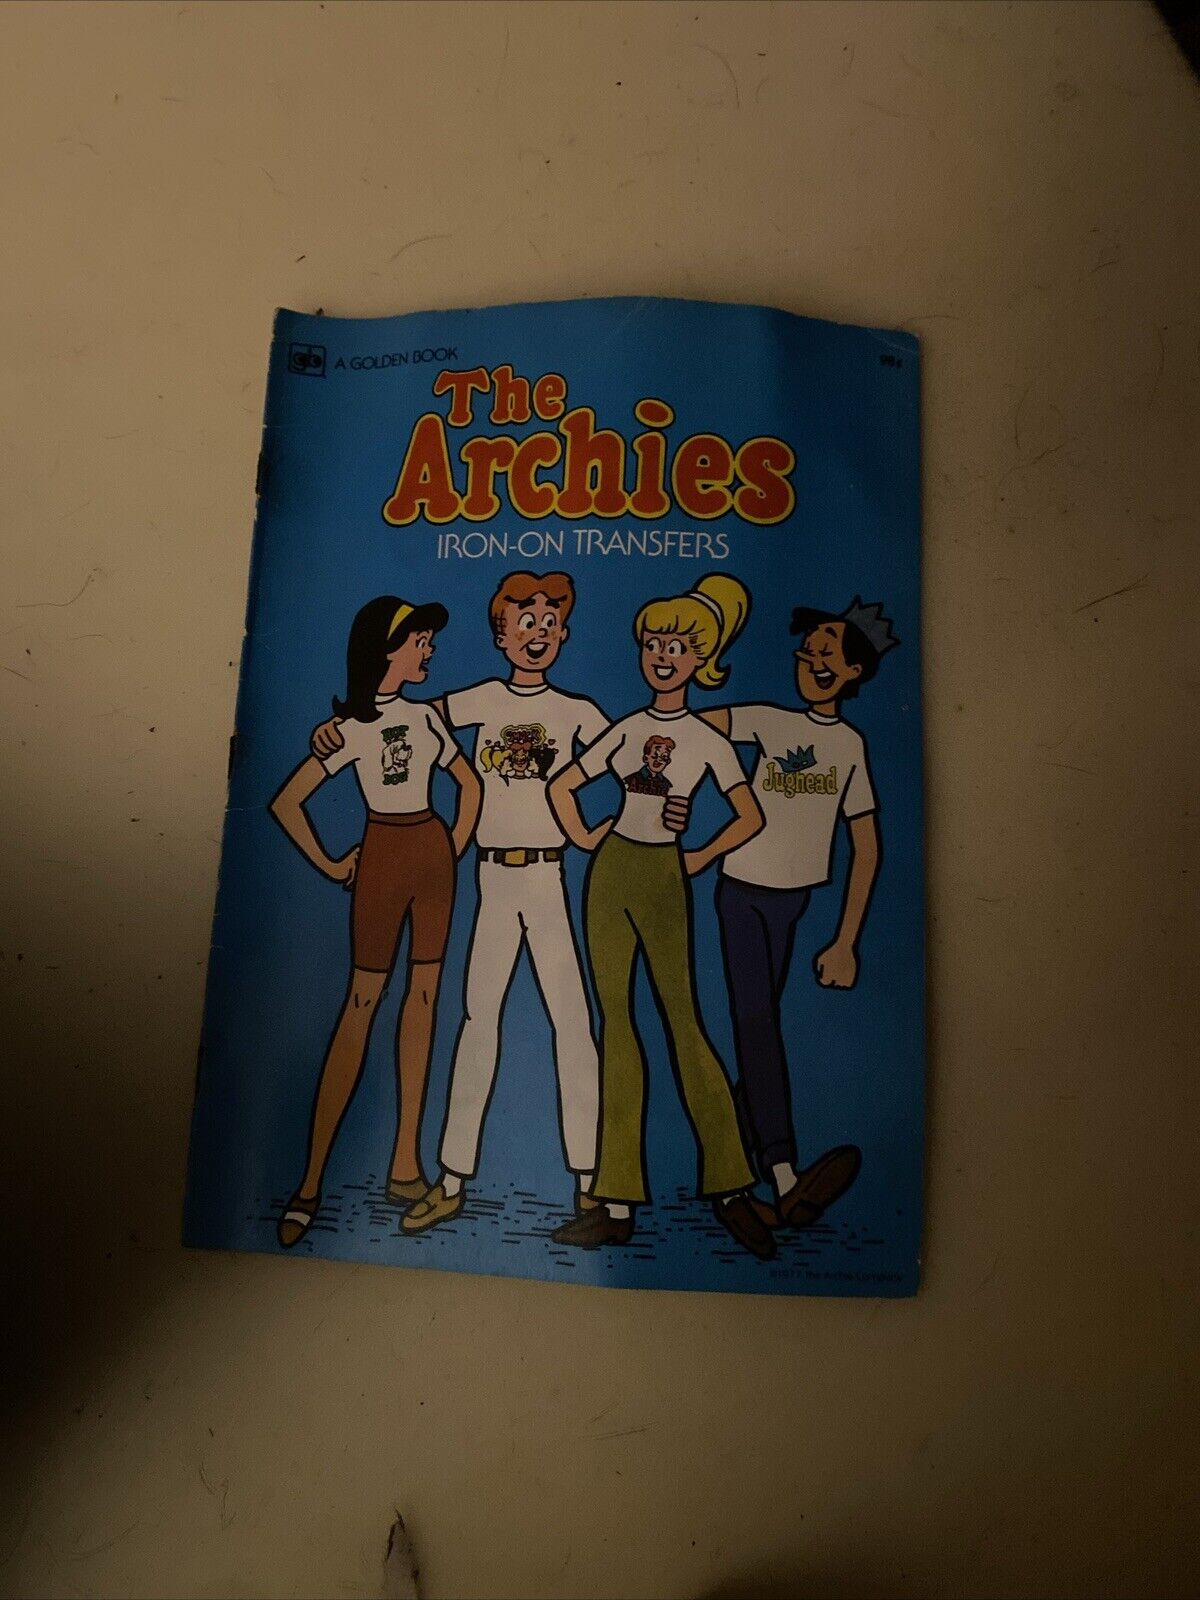 Rare Vintage 1977 The Archies Iron-On Transfers Golden Book